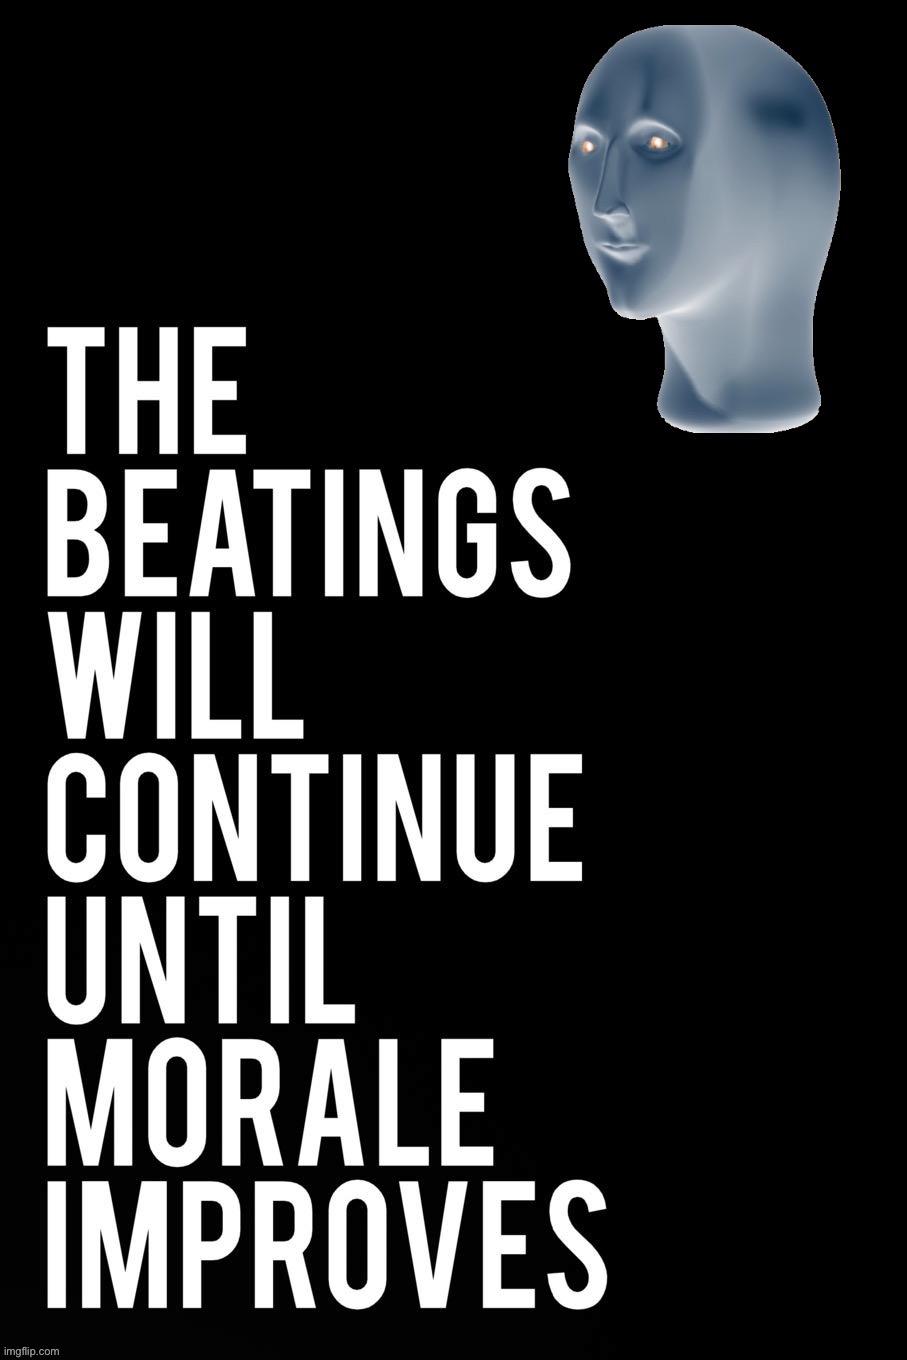 Meme man the beatings will continue until morale improves | image tagged in meme man the beatings will continue until morale improves | made w/ Imgflip meme maker